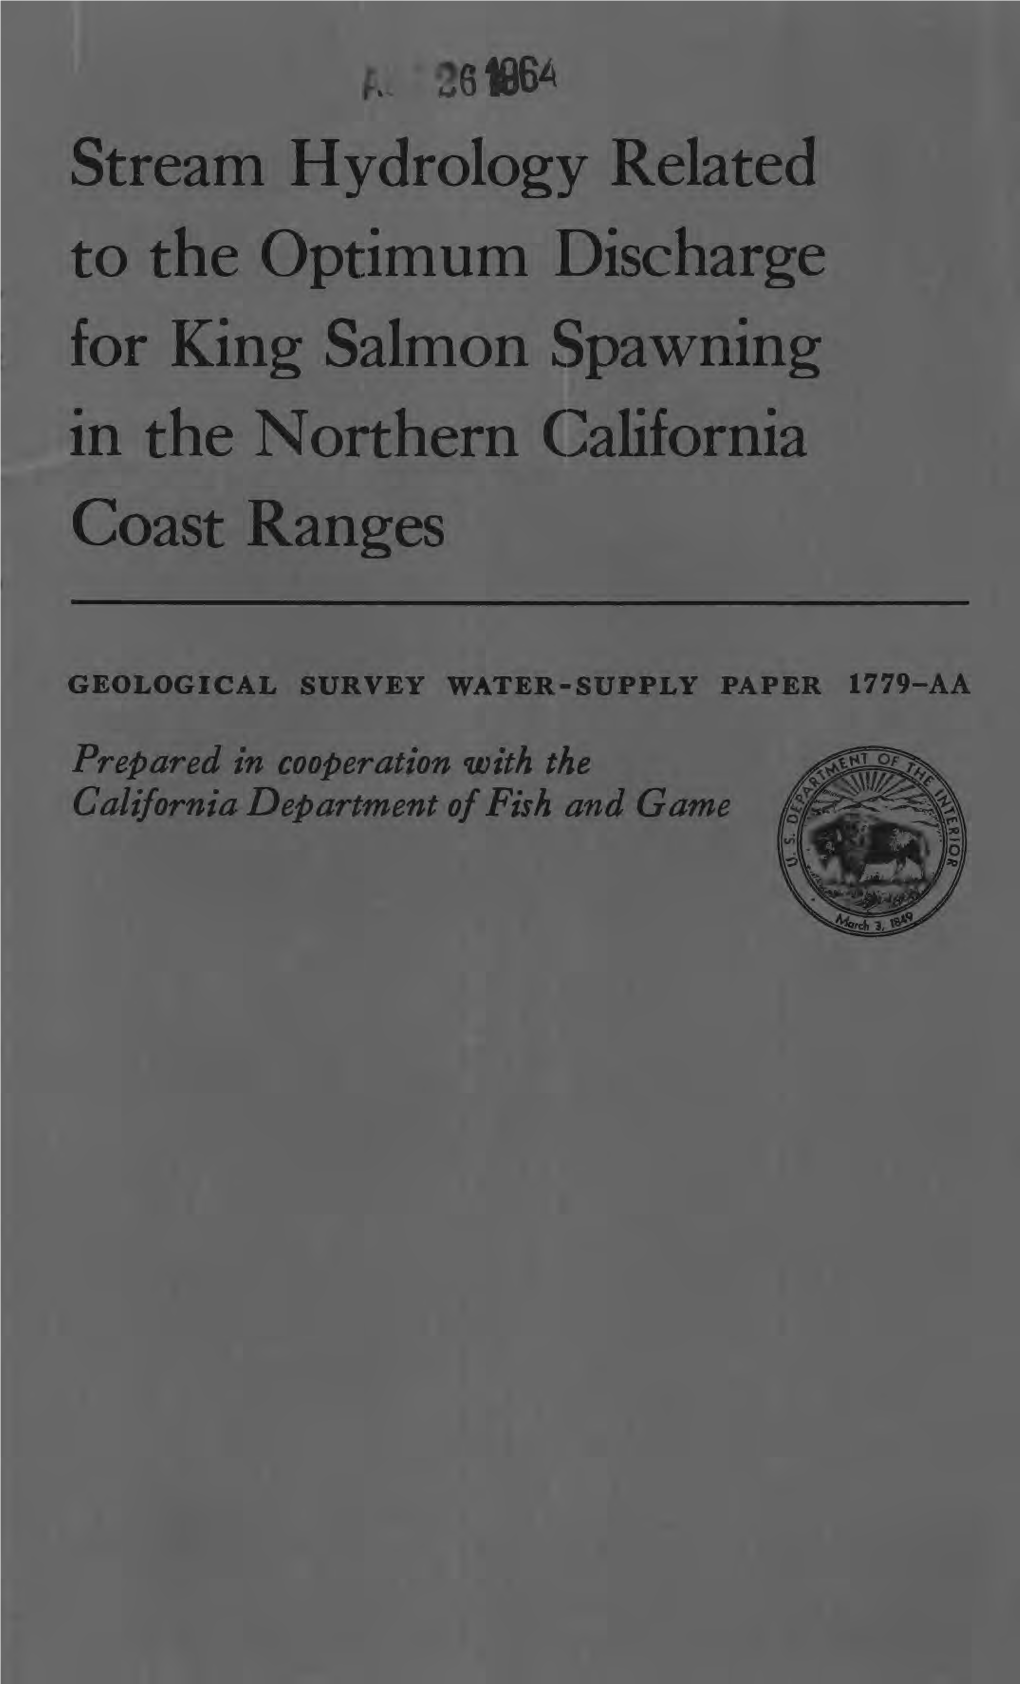 Stream Hydrology Related to the Optimum Discharge for King Salmon Spawning in the Northern California Coast Ranges